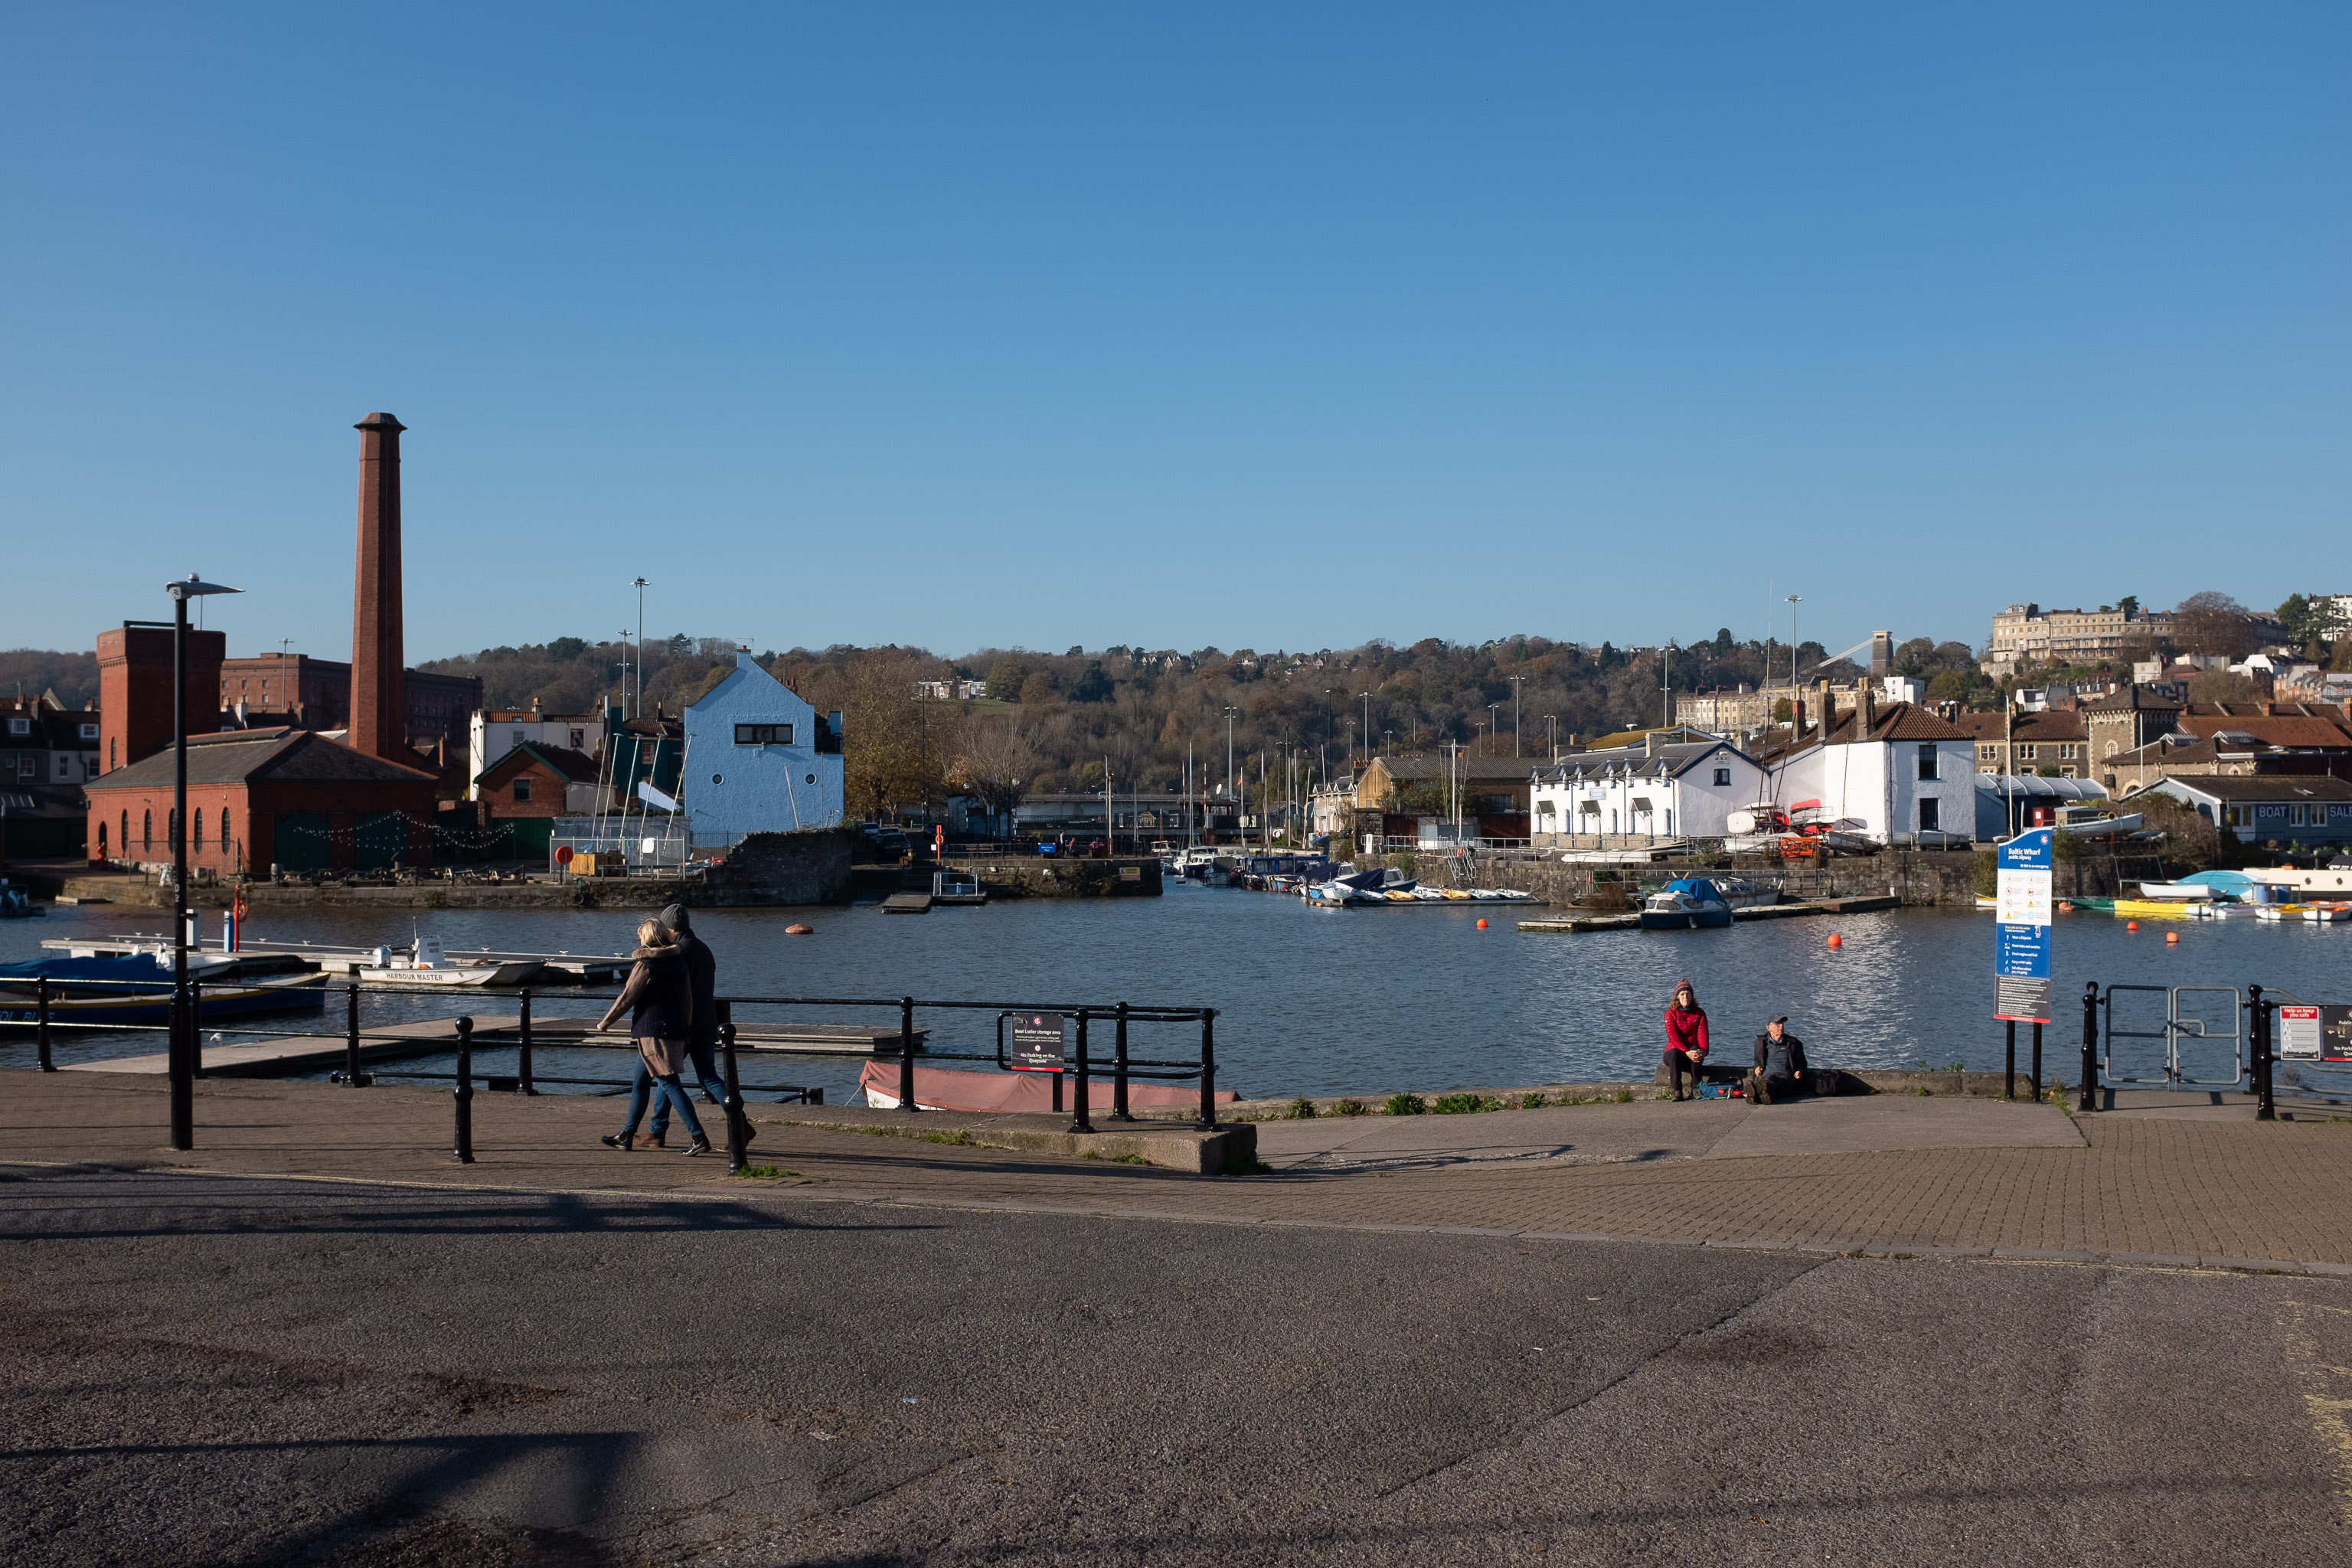 Harbourside
Looking towards Ashton Court and Leigh Woods
